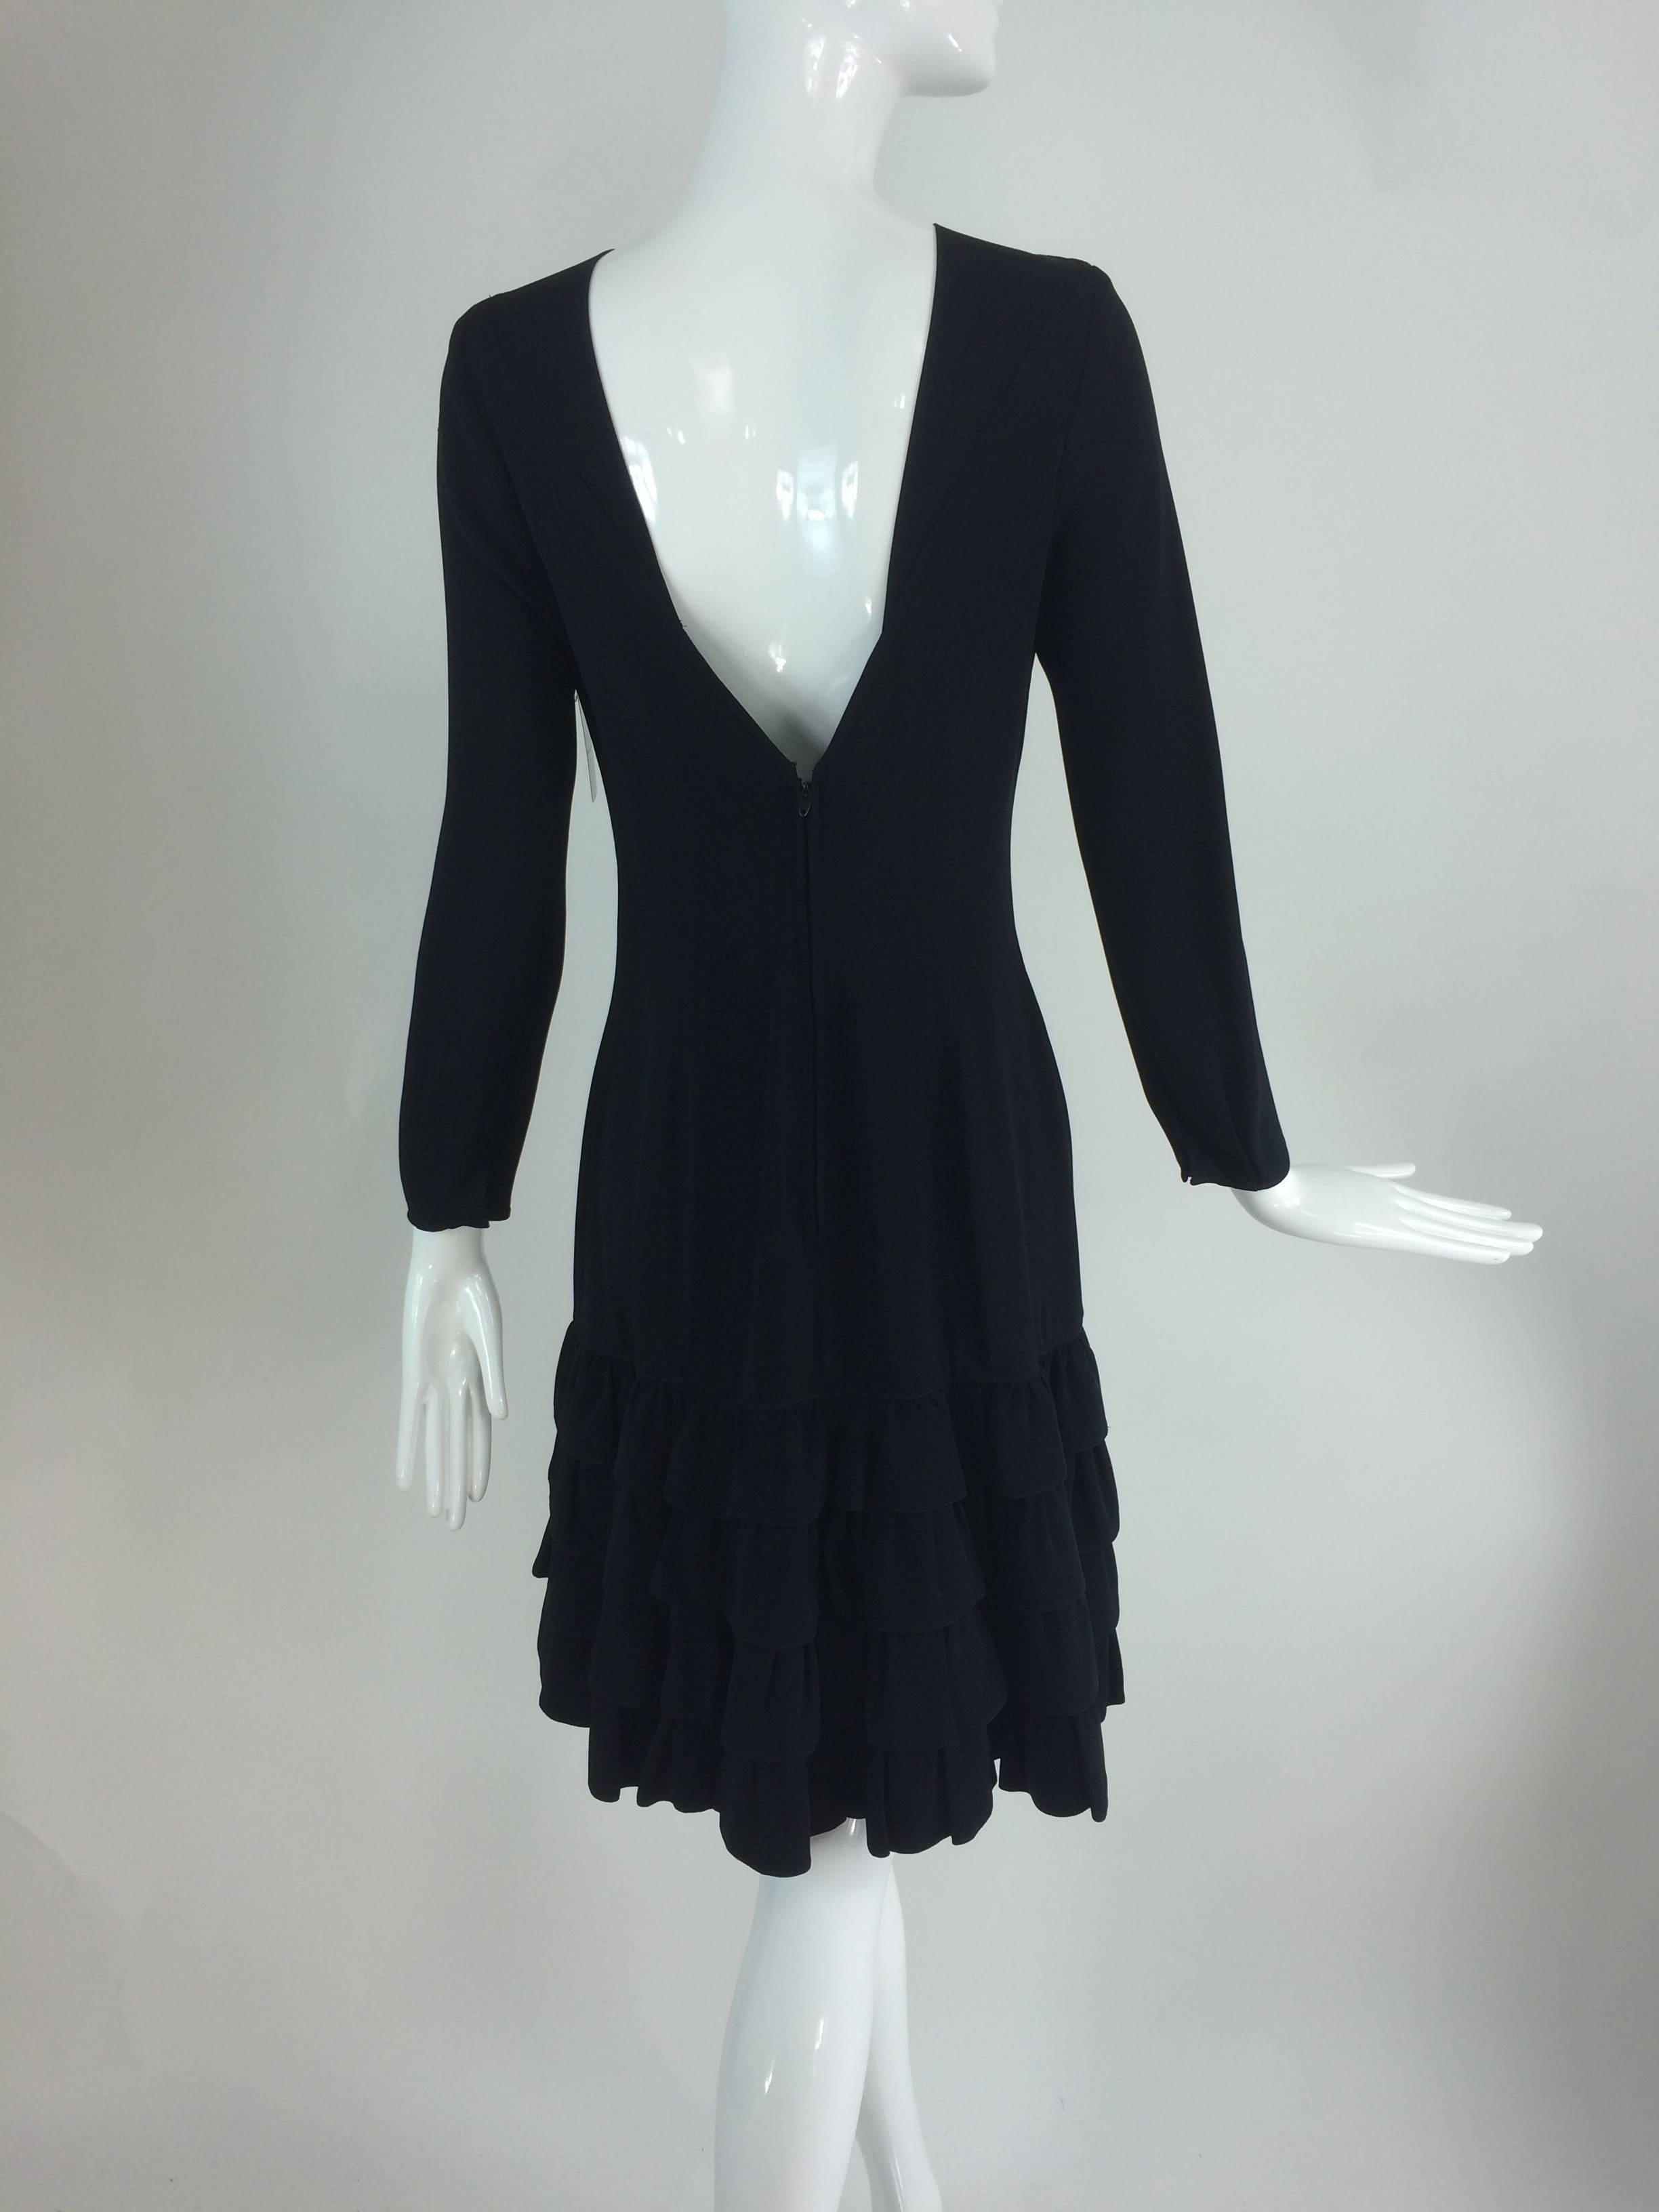 Rifat Ozbek black crepe dress with tiered ruffle hem 1980s...Princess seamed dress in black gabardine, with top stitched seams this dress has subtle details that give it a chic look...There are inset panels at the neckline that form a slightly